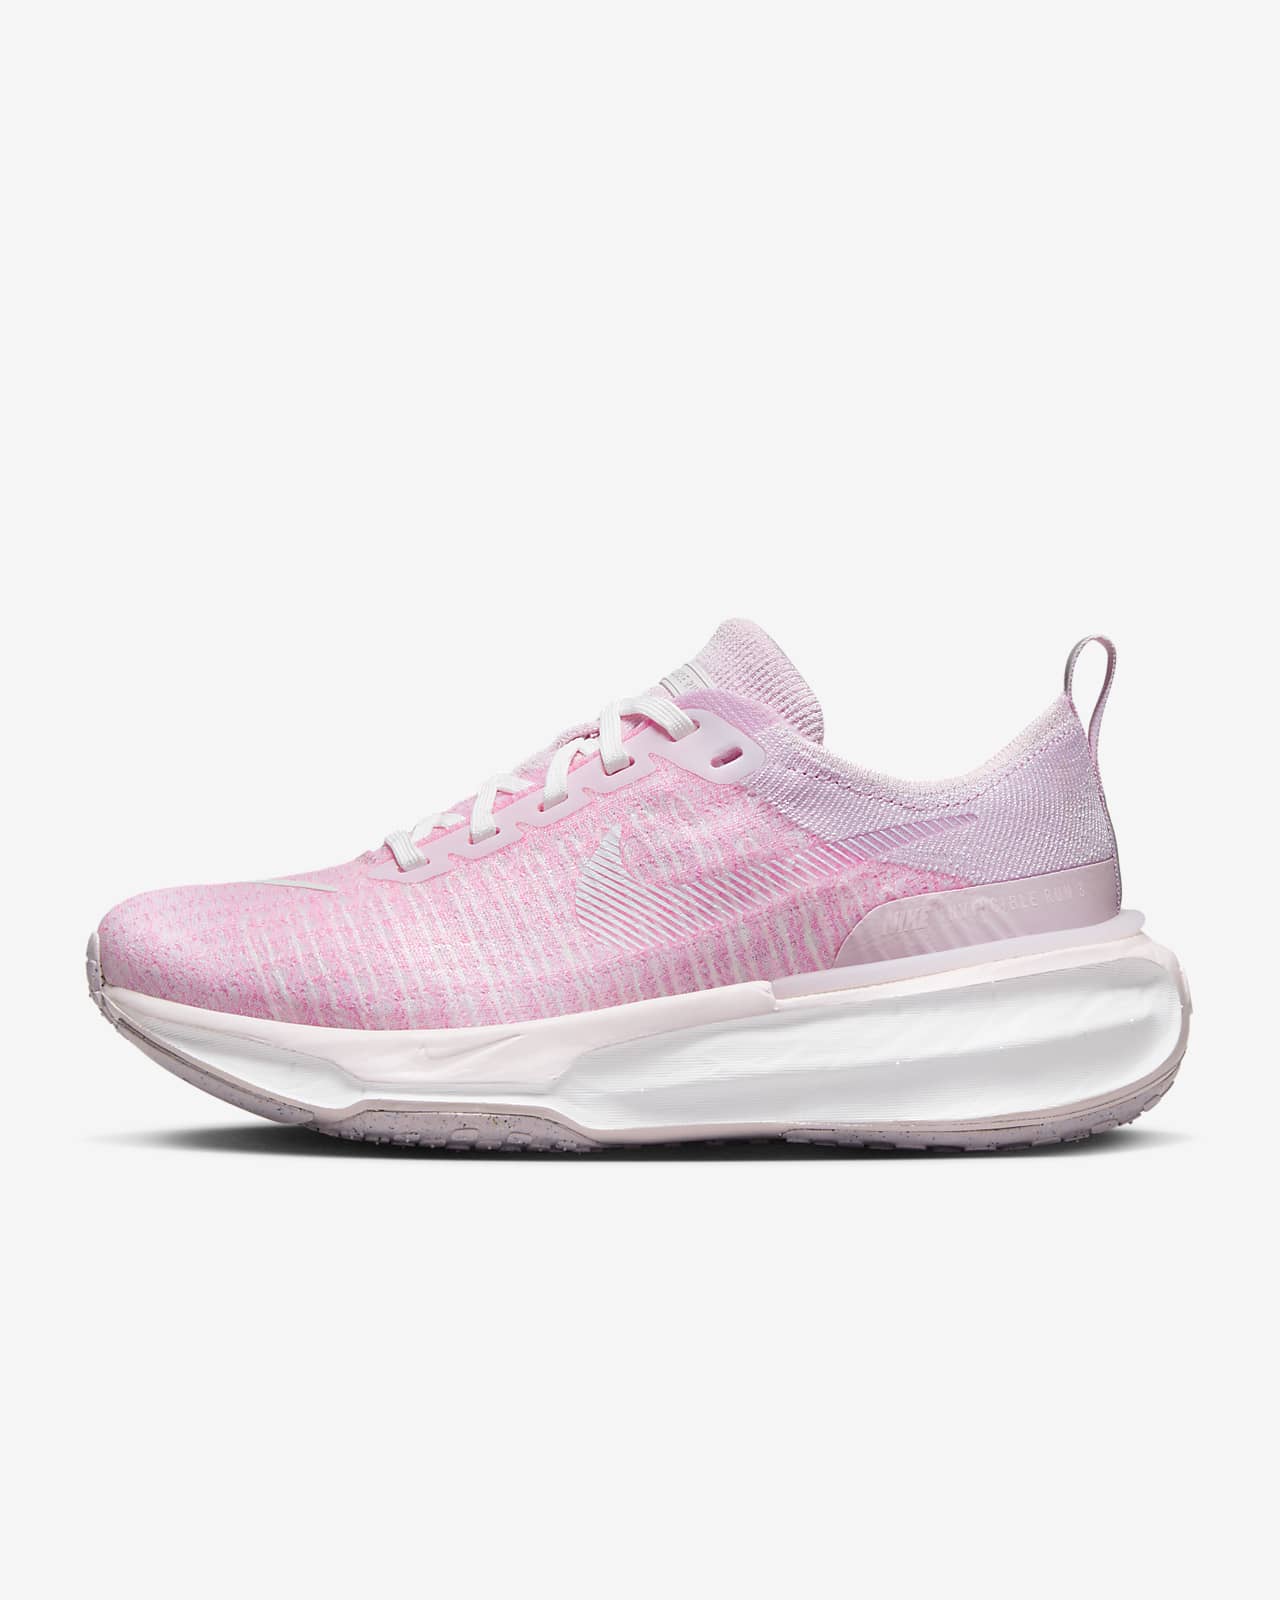 Nike Invincible 3 Women's Road Running Shoes (Extra Wide)